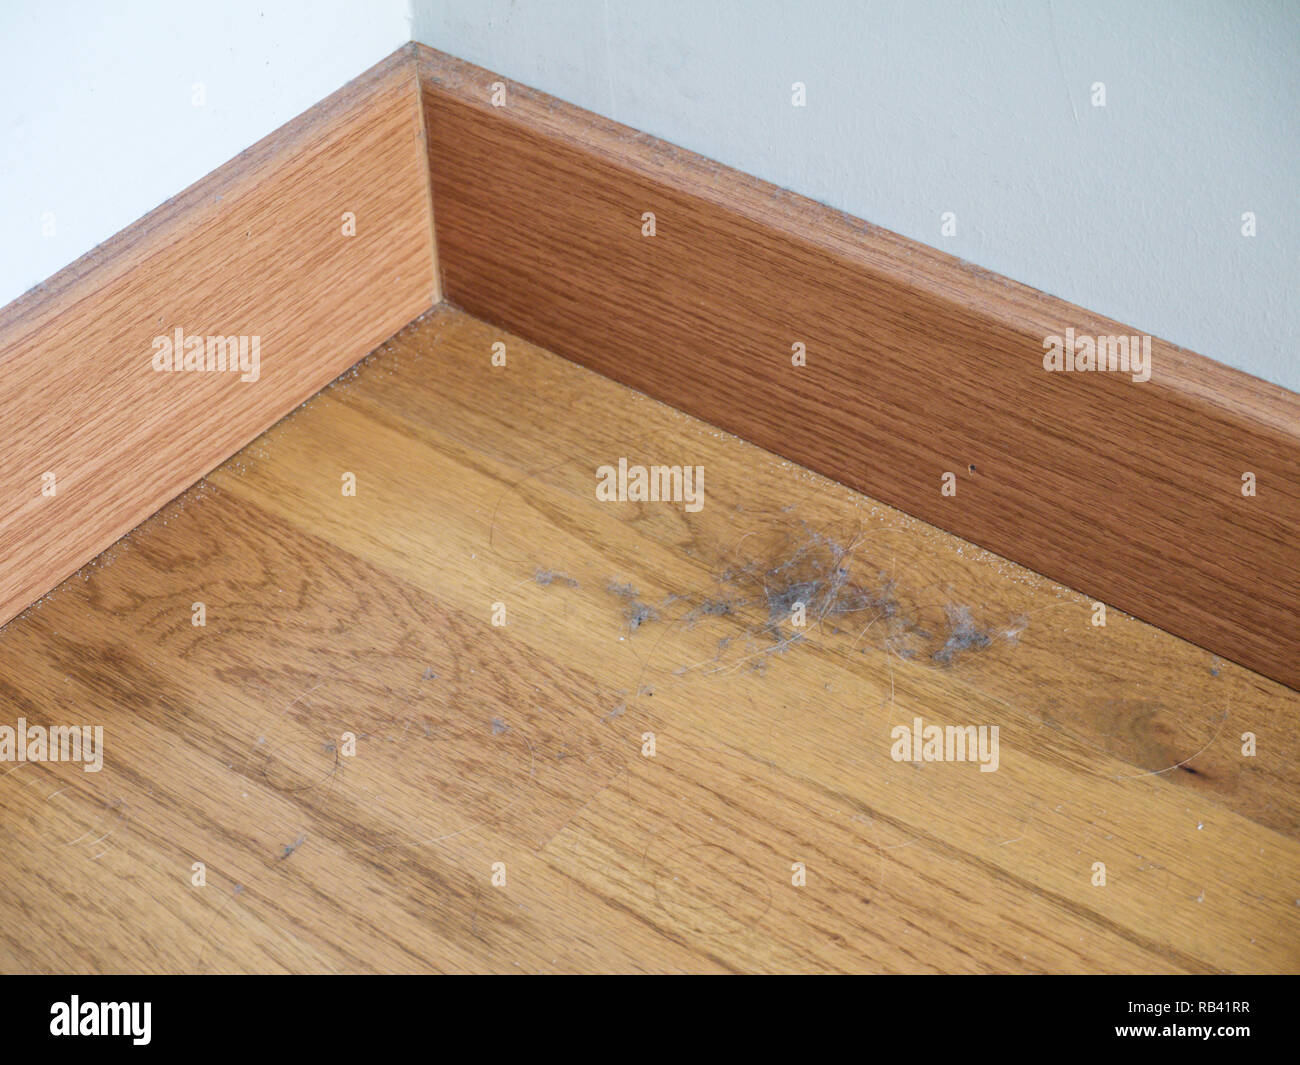 Dust and hairs on the laminate floor in the corner and on baseboard. Dustbunnies. Stock Photo